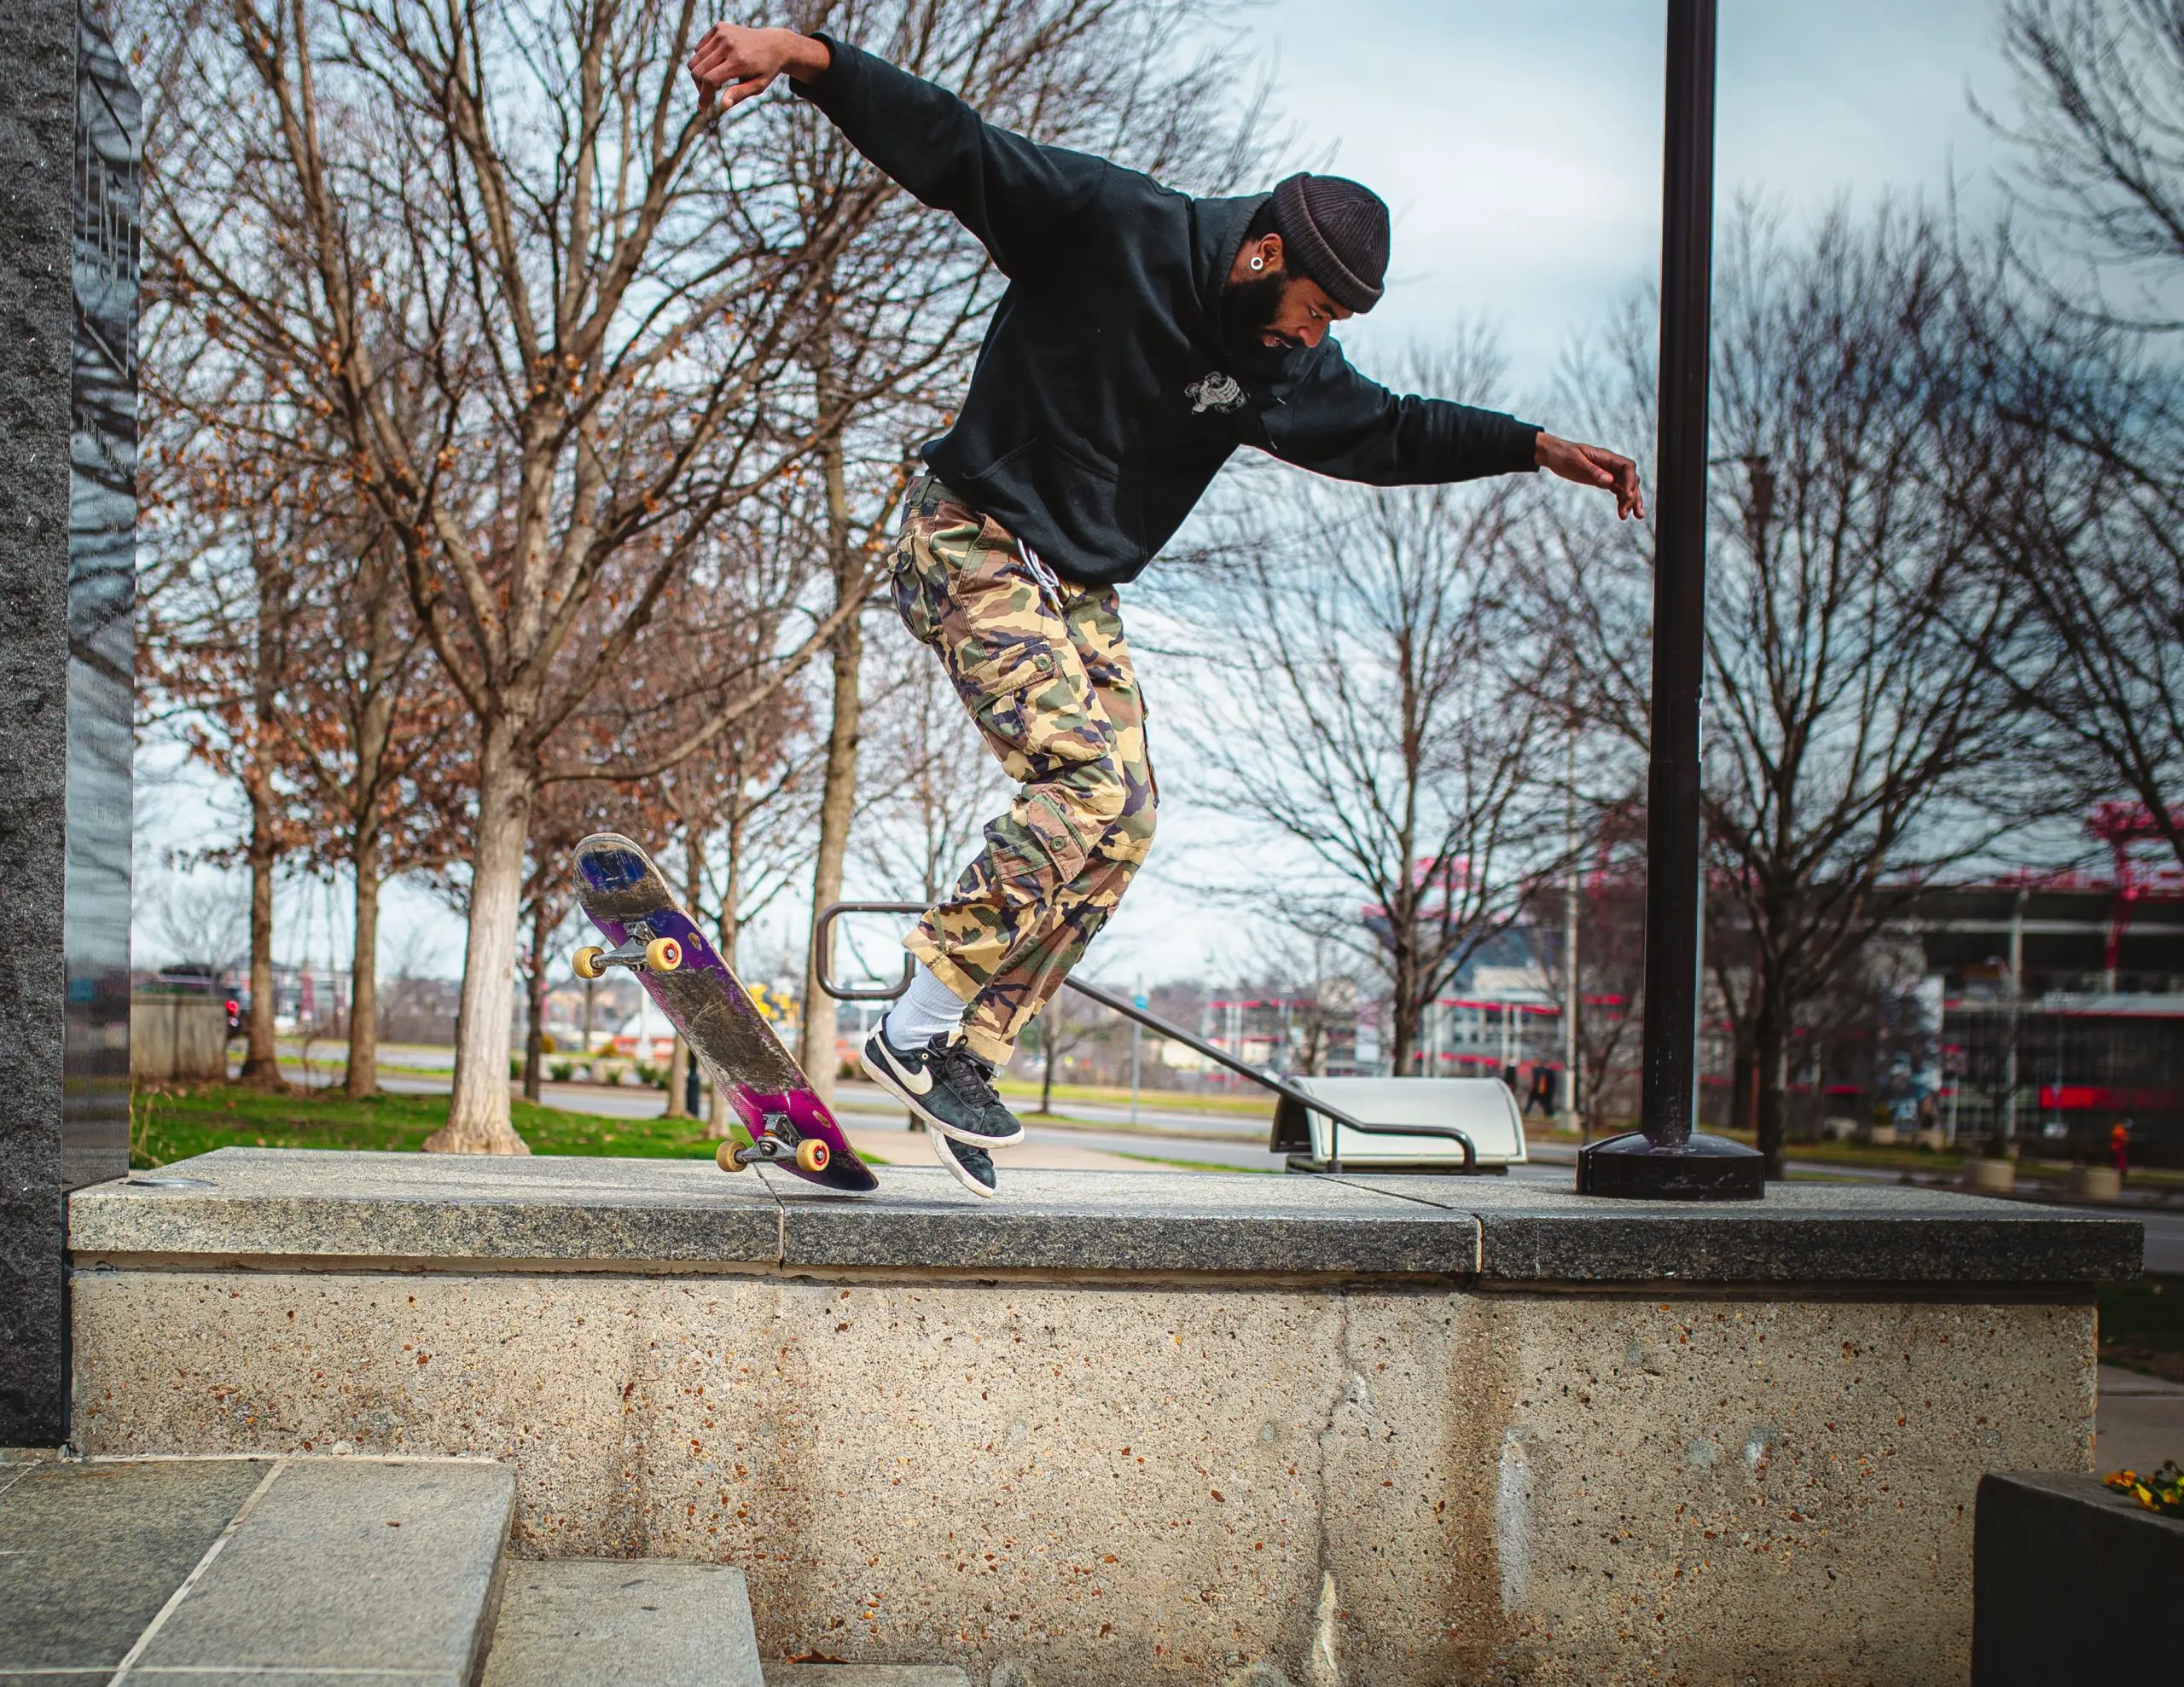 Image of a male skateboarder doing a freestyle skateboard trick on a ramp. Source: unsplash